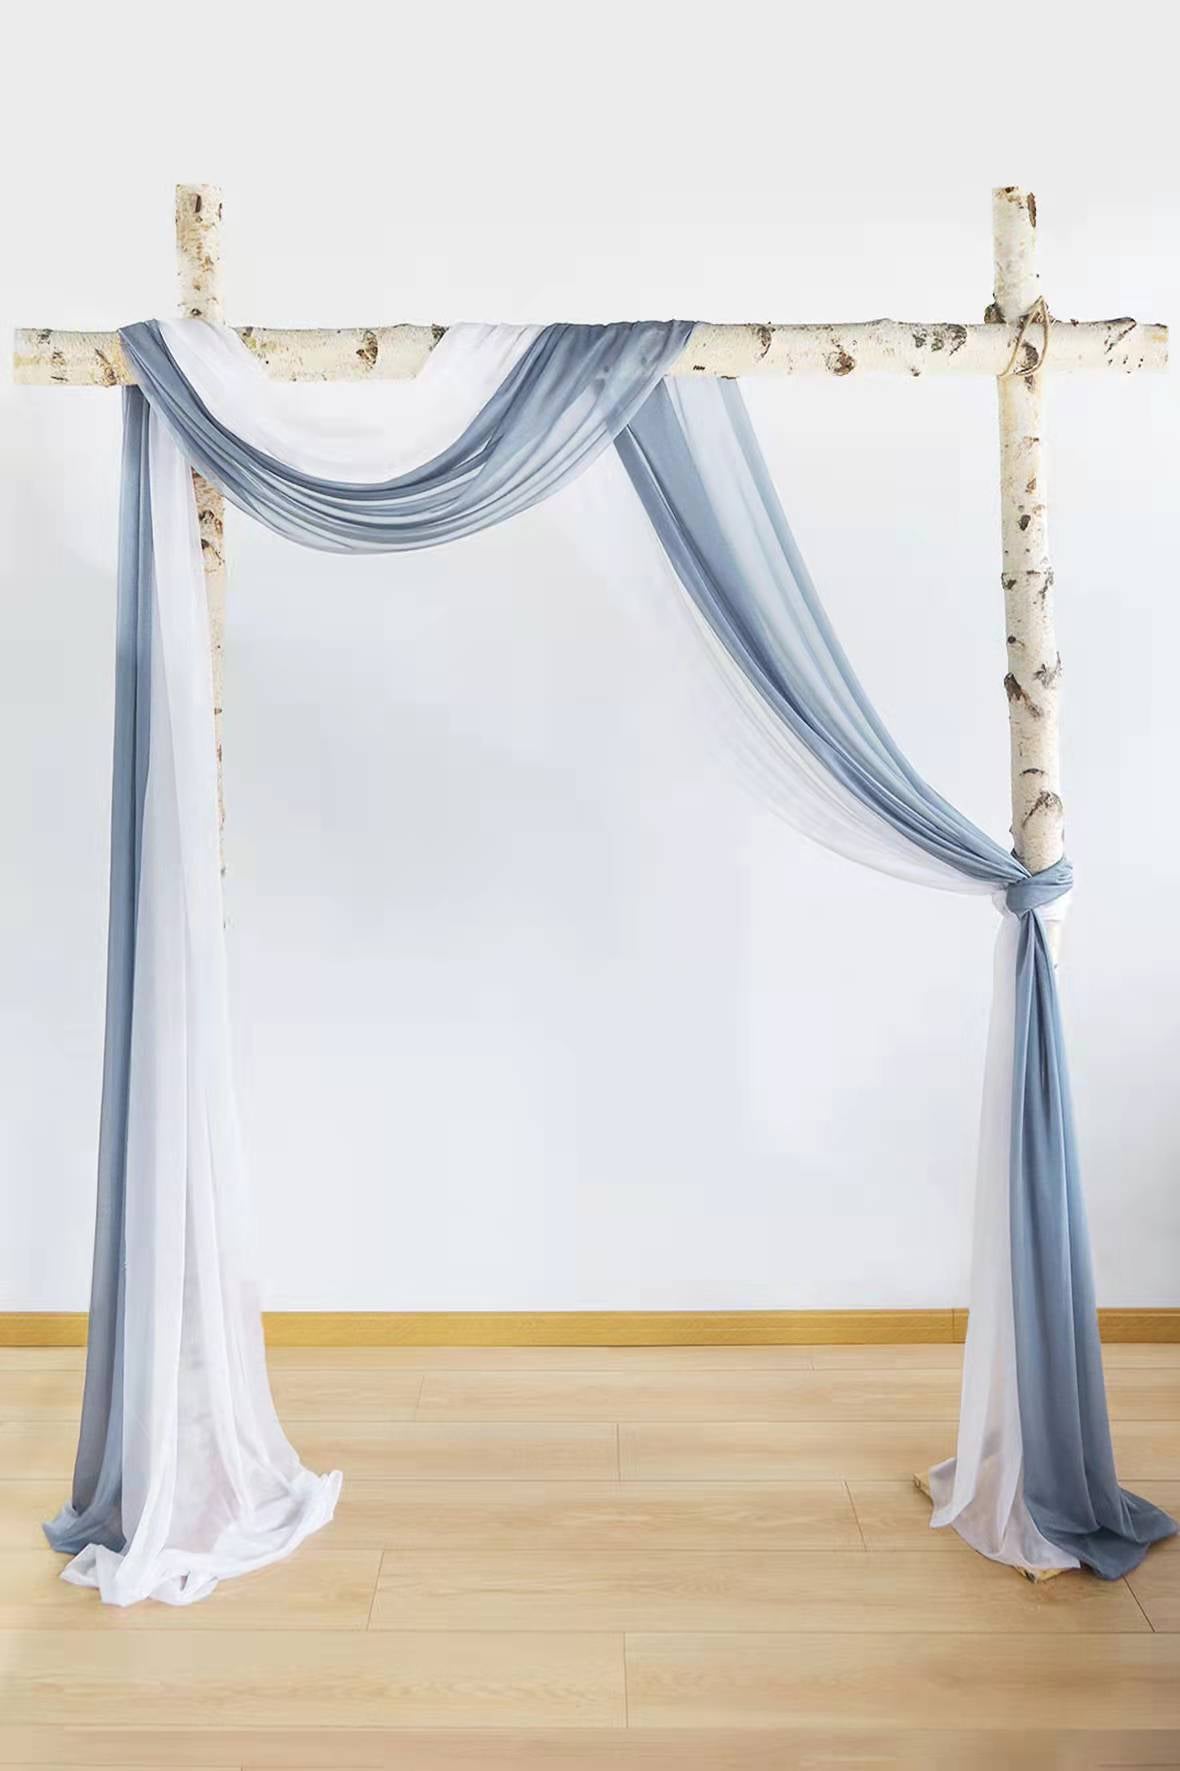 2 Pcs Rustic Wedding Arch Draping 29"w x 19.7ft - 5 Colors